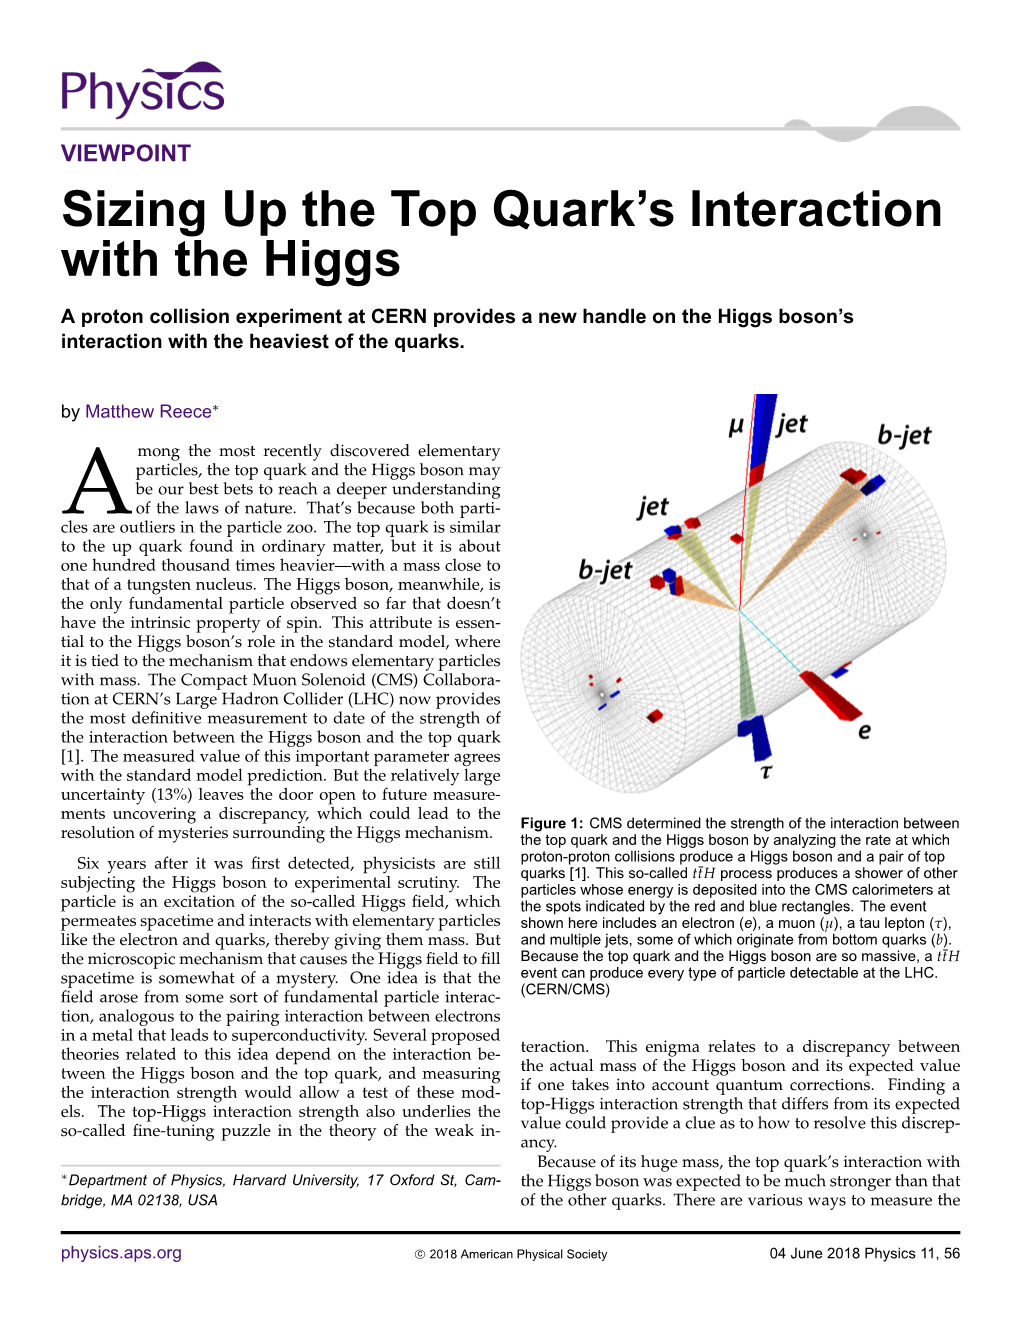 Sizing up the Top Quark's Interaction with the Higgs